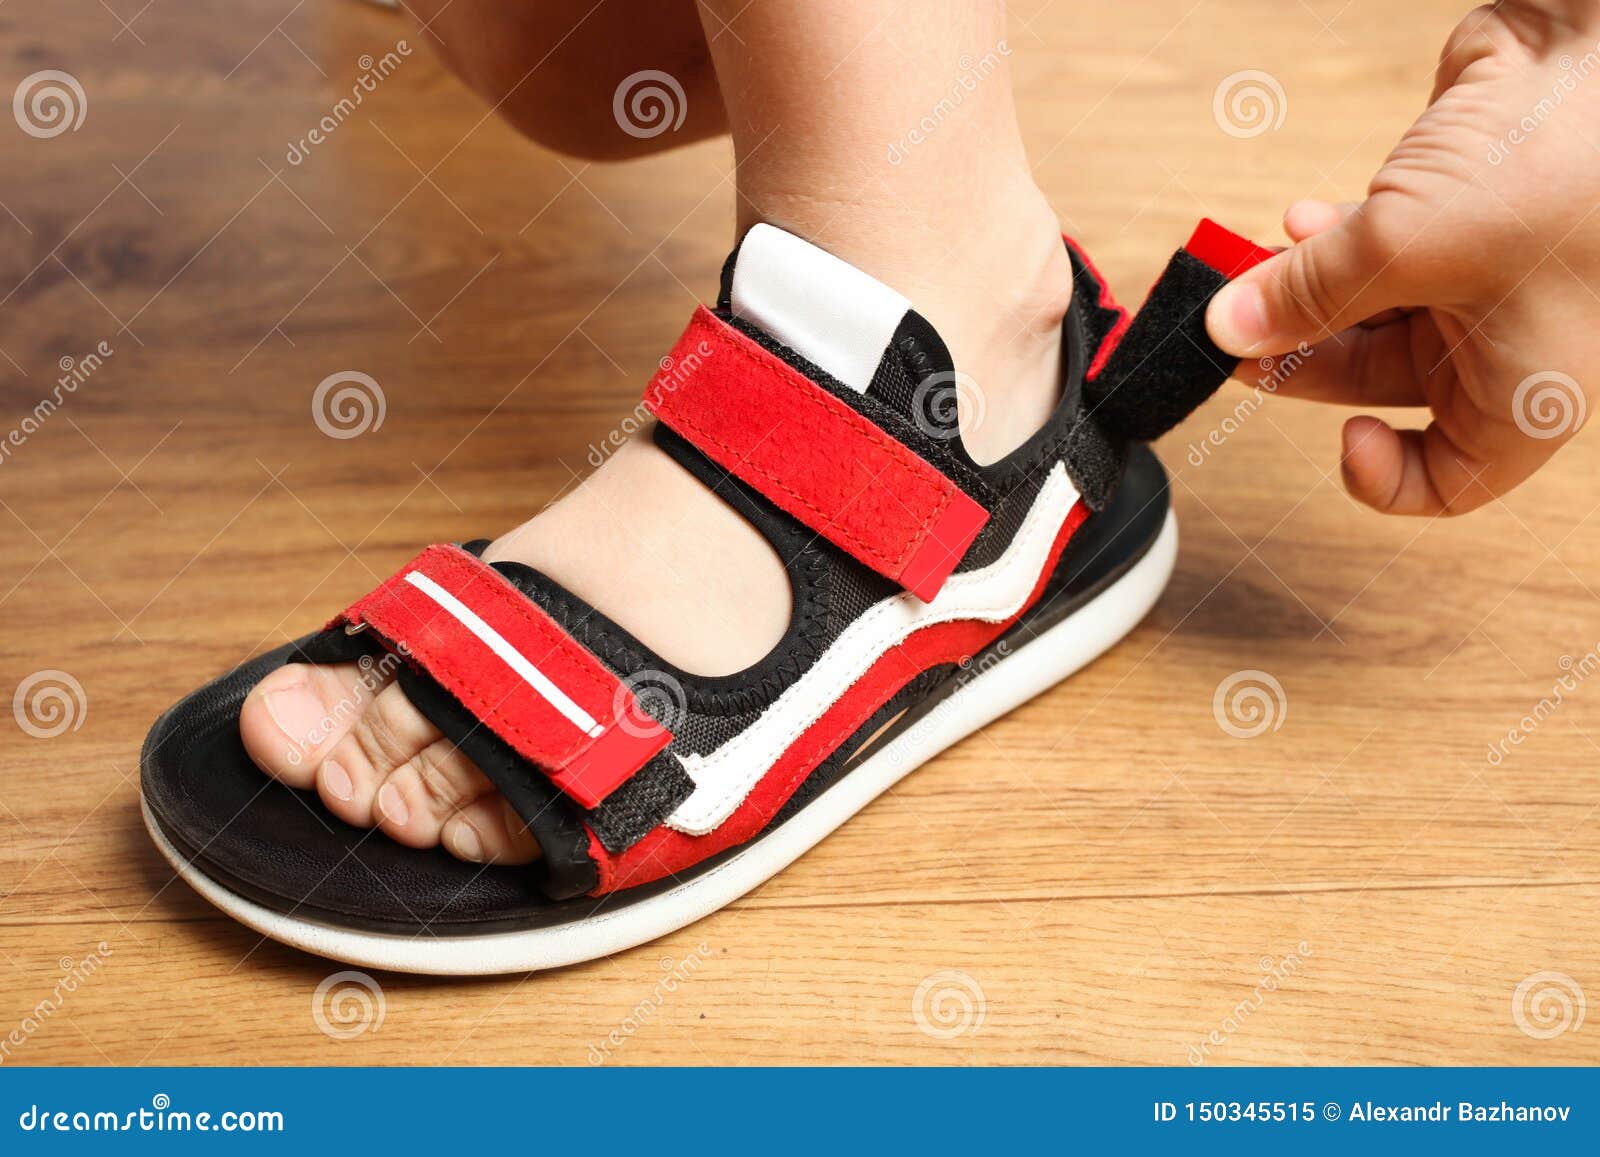 stylish red sandals with velcro